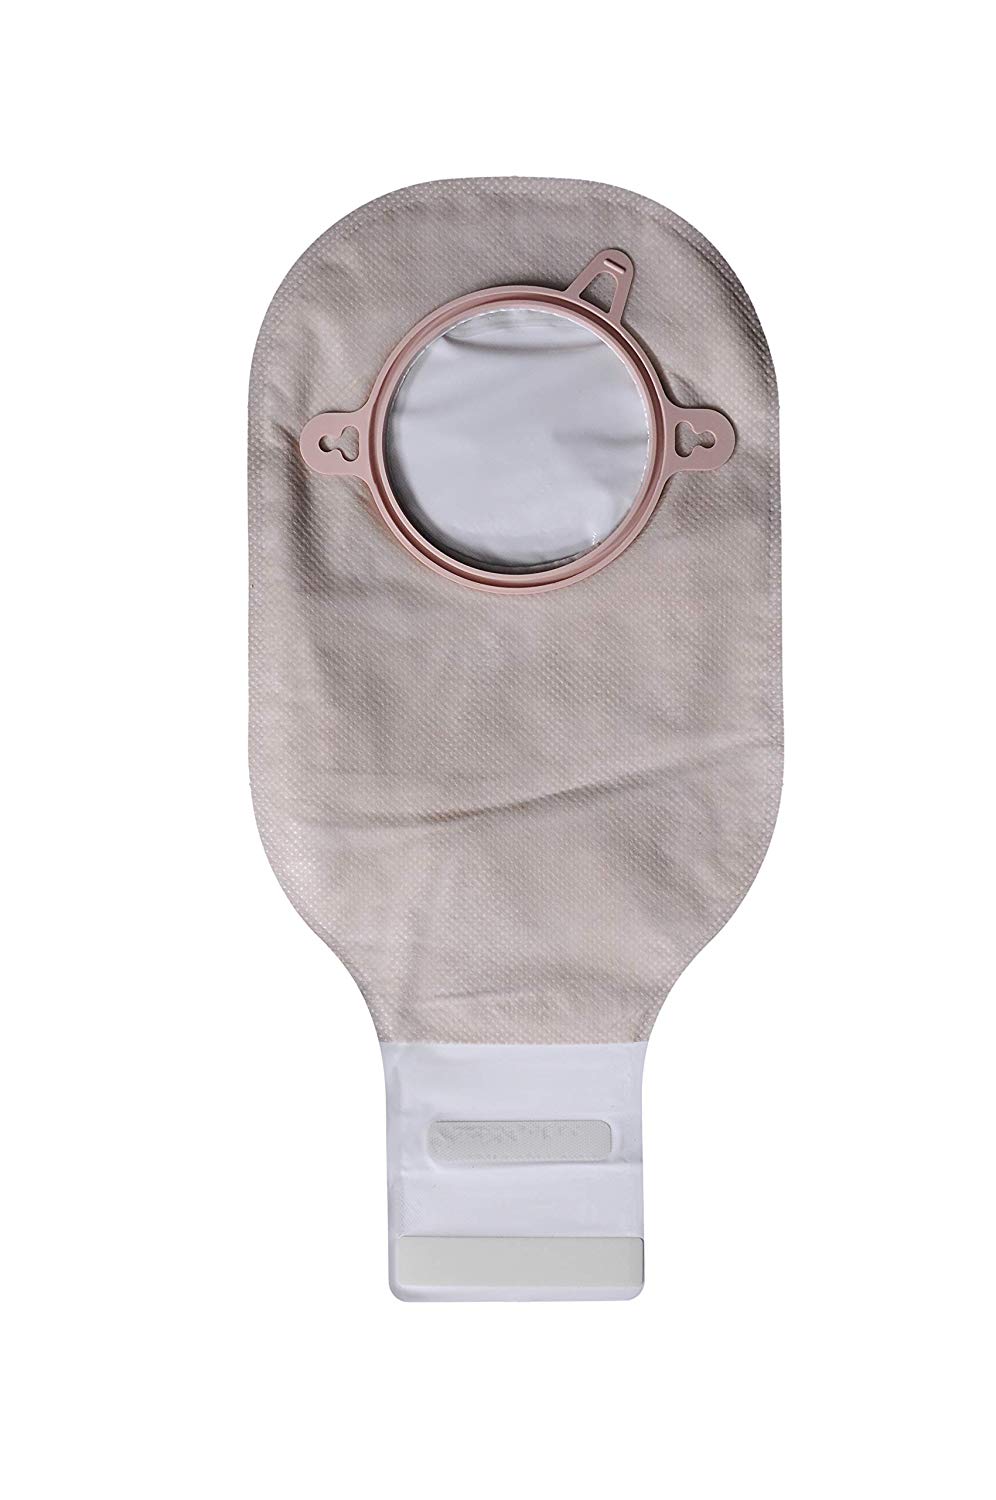 Hollister Conform 2 Colostomy Bag 27760-5 in Mumbai at best price by Sb  Sales International Pvt Ltd - Justdial